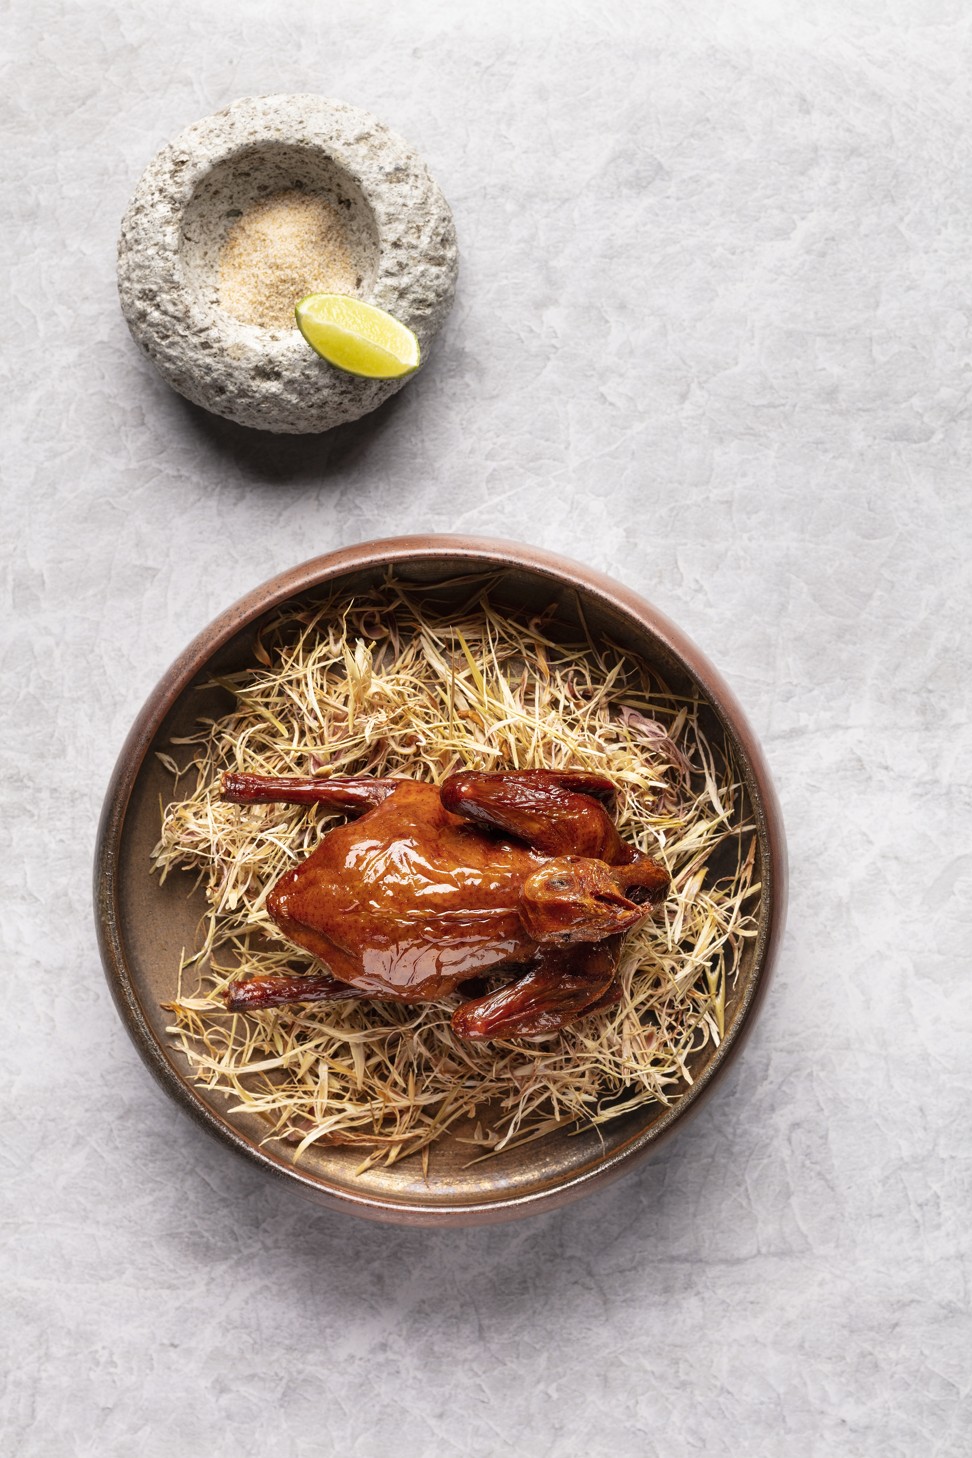 Oven-roasted baby pigeon with lemongrass